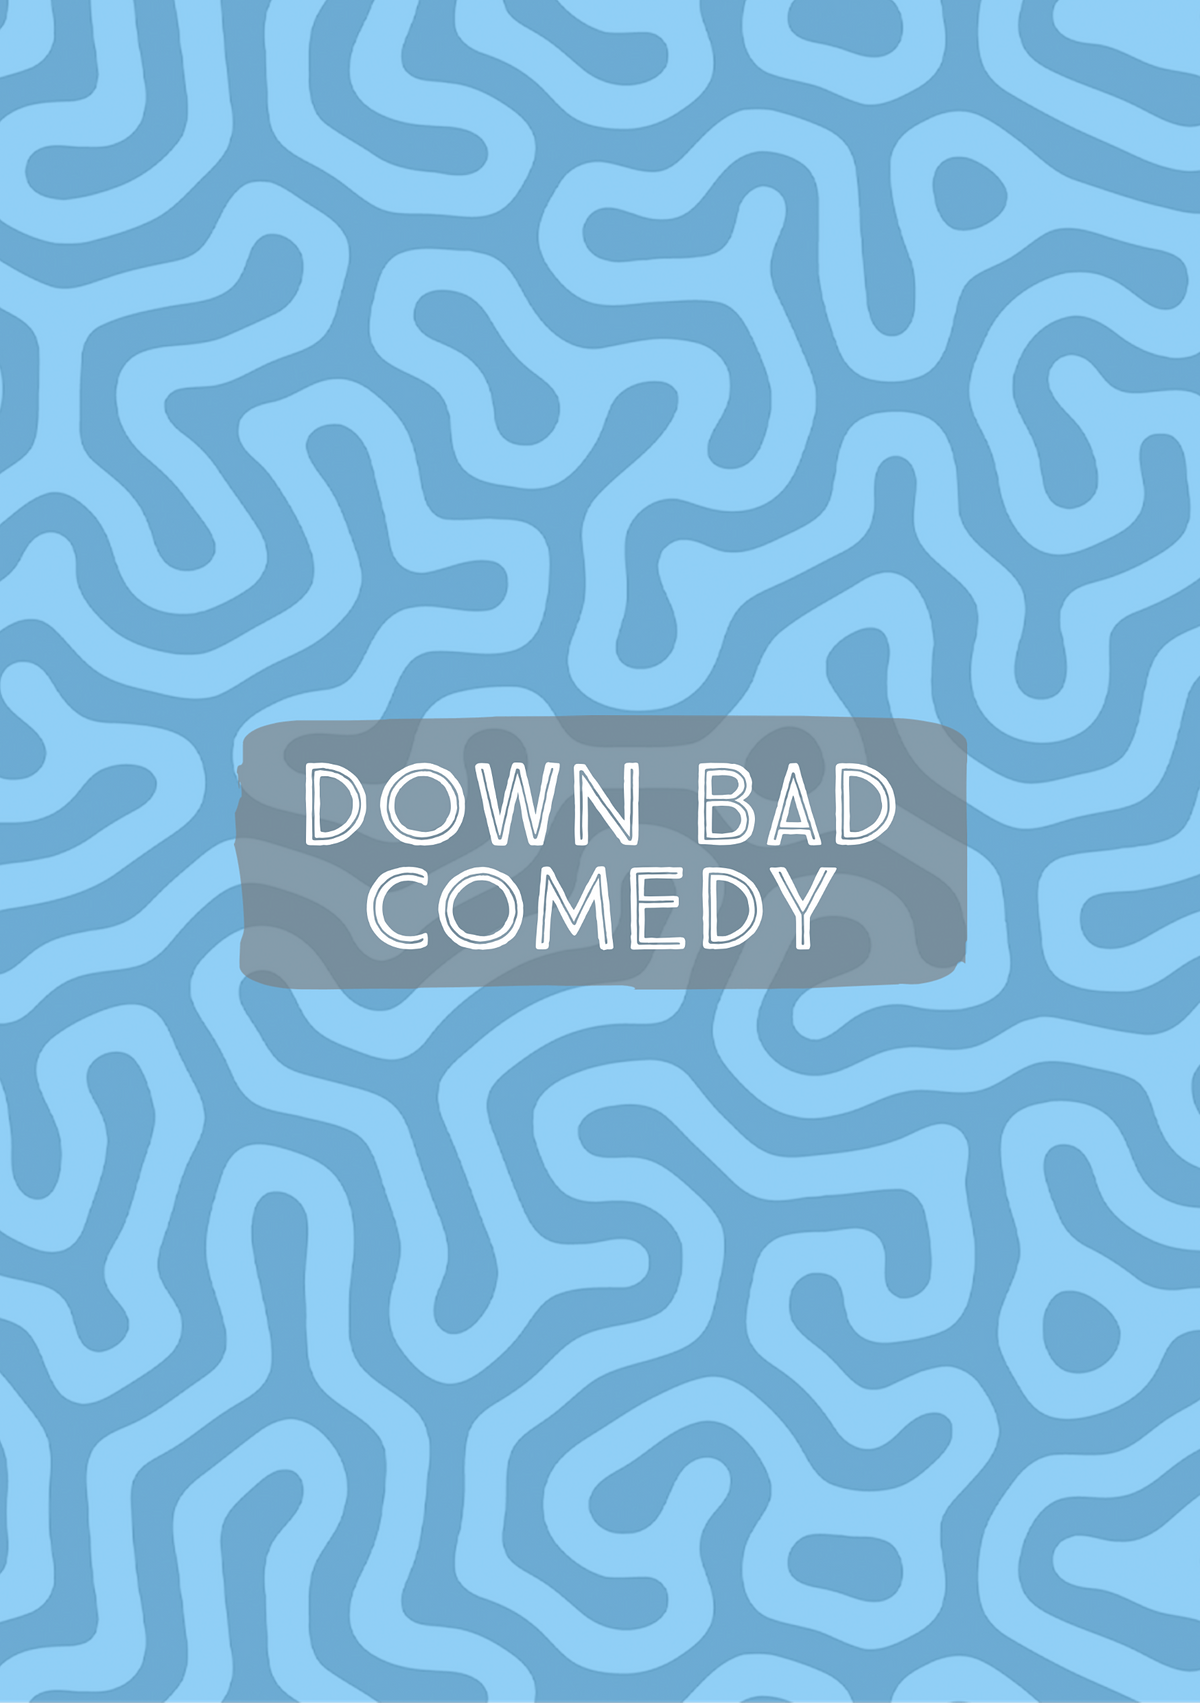 DOWN BAD COMEDY SHOW!